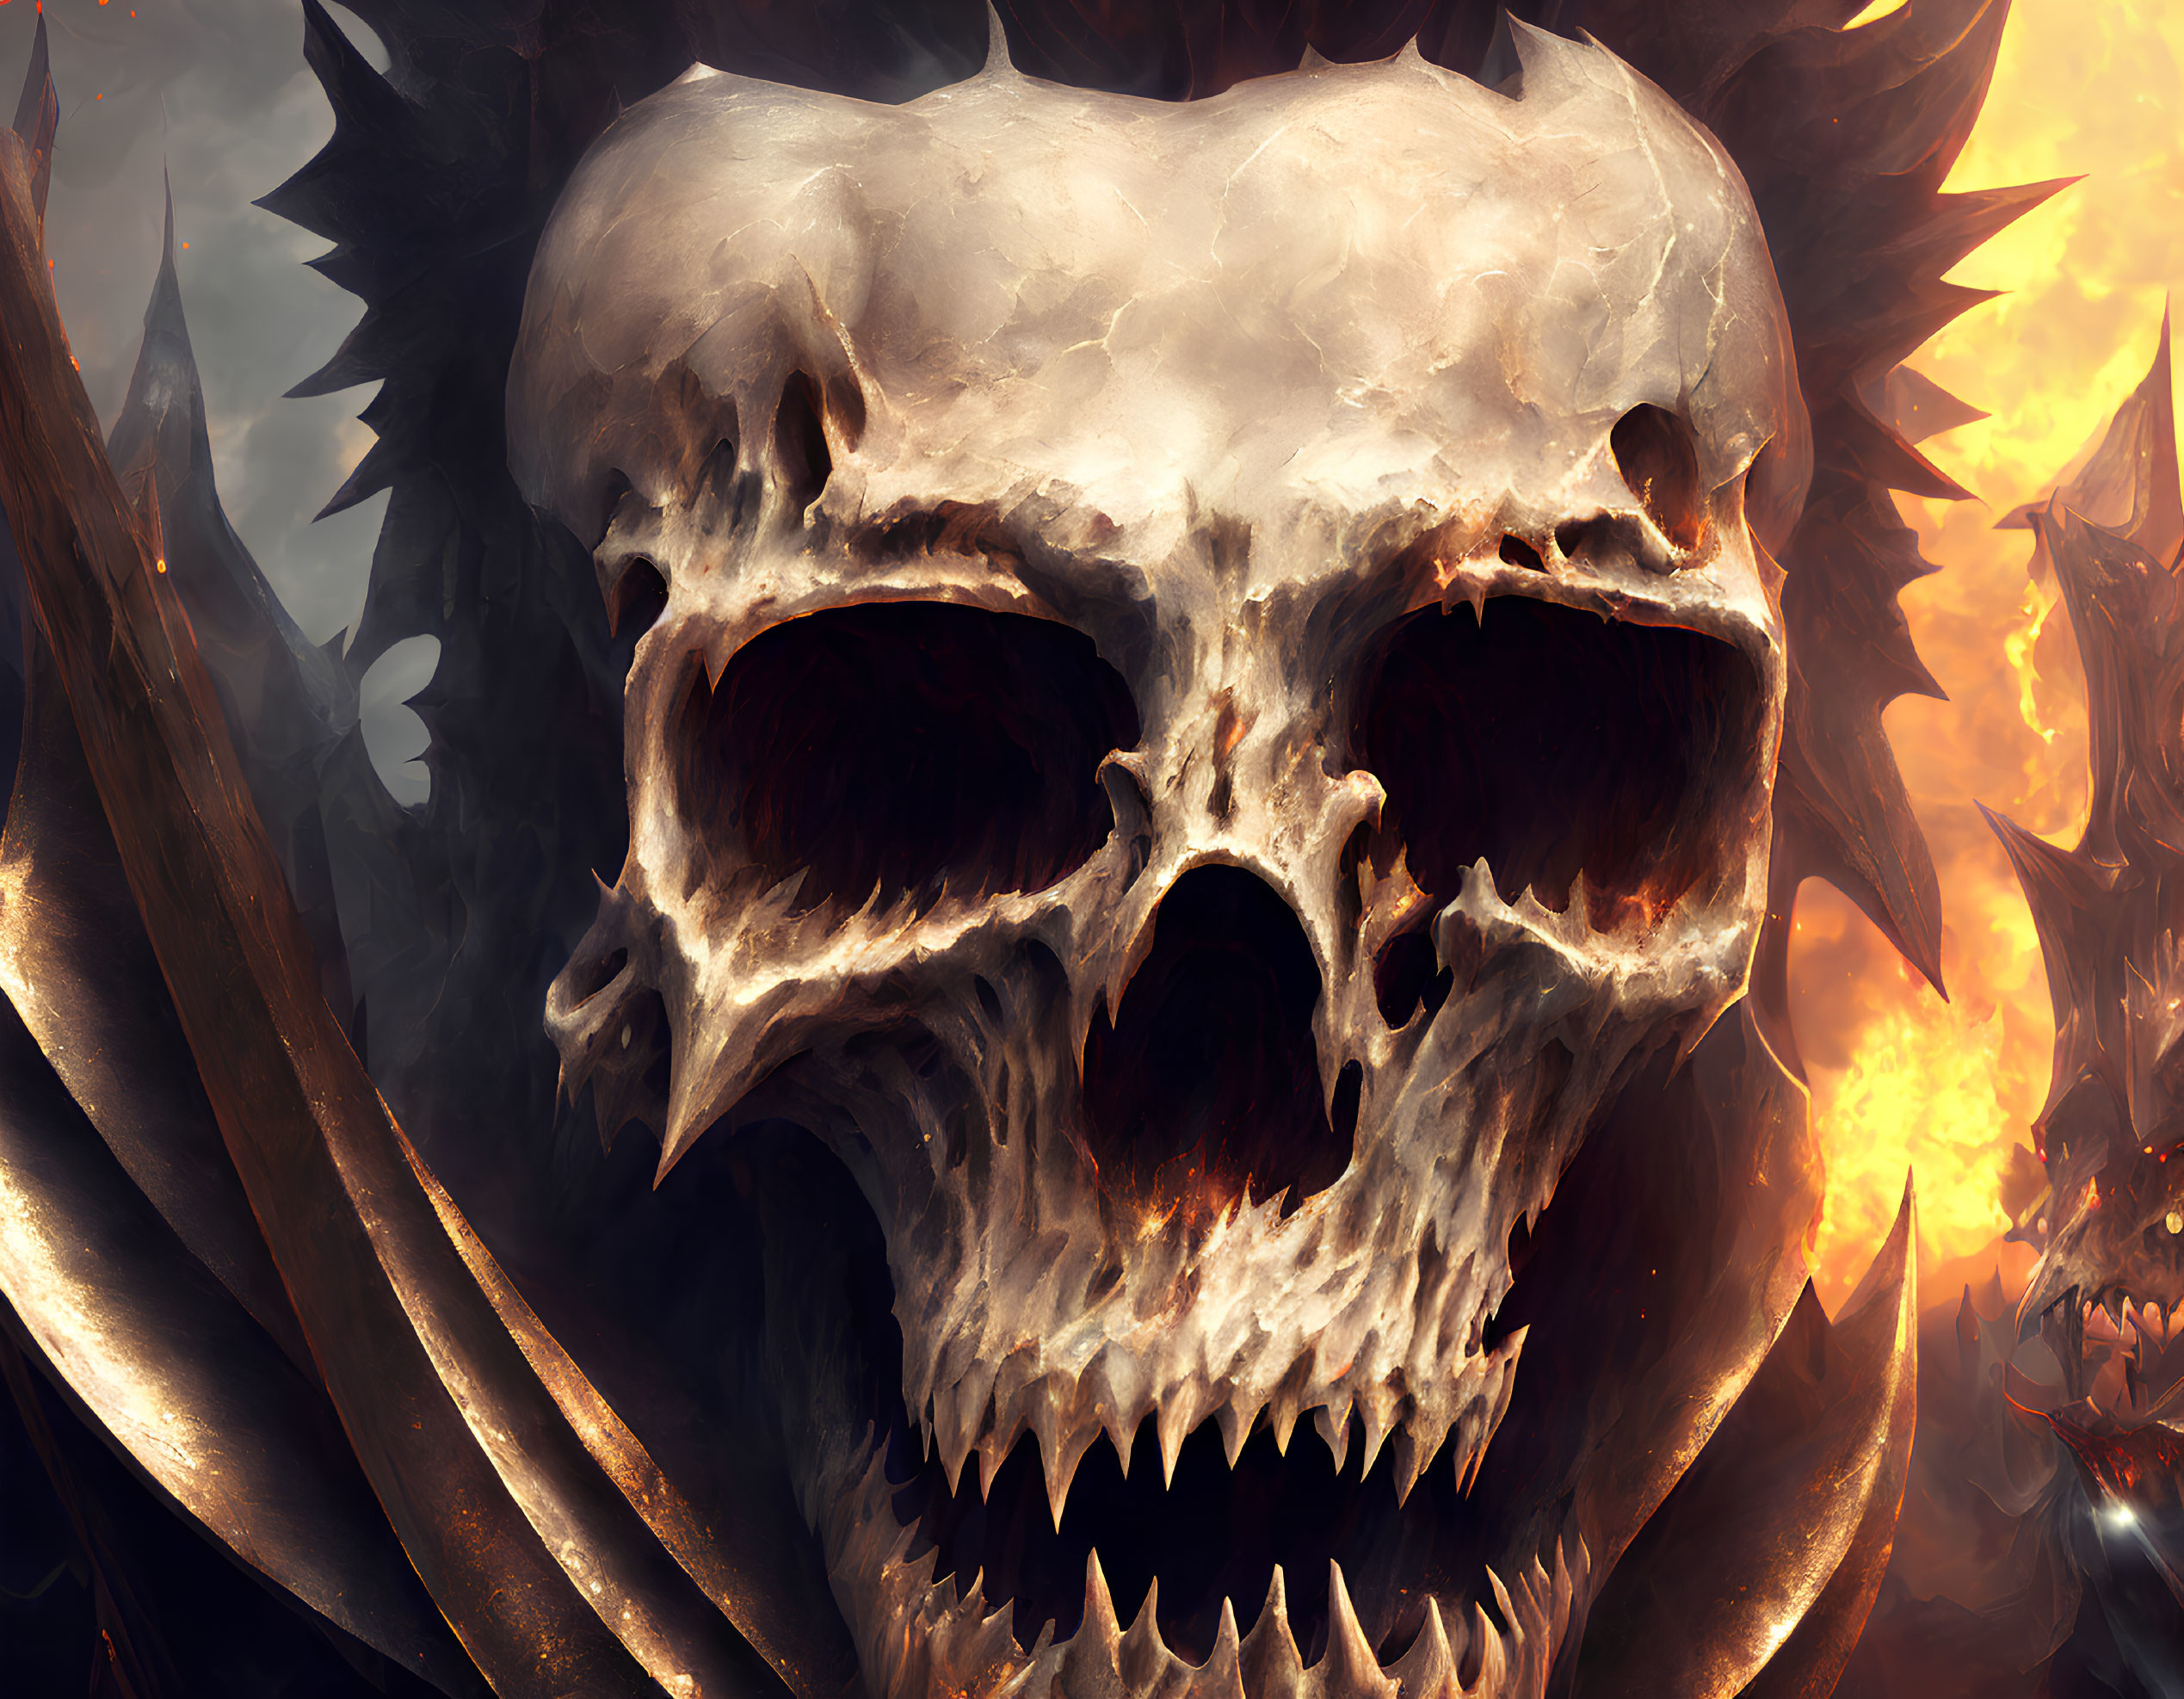 Menacing skull with sharp teeth on fiery background and monstrous silhouettes.